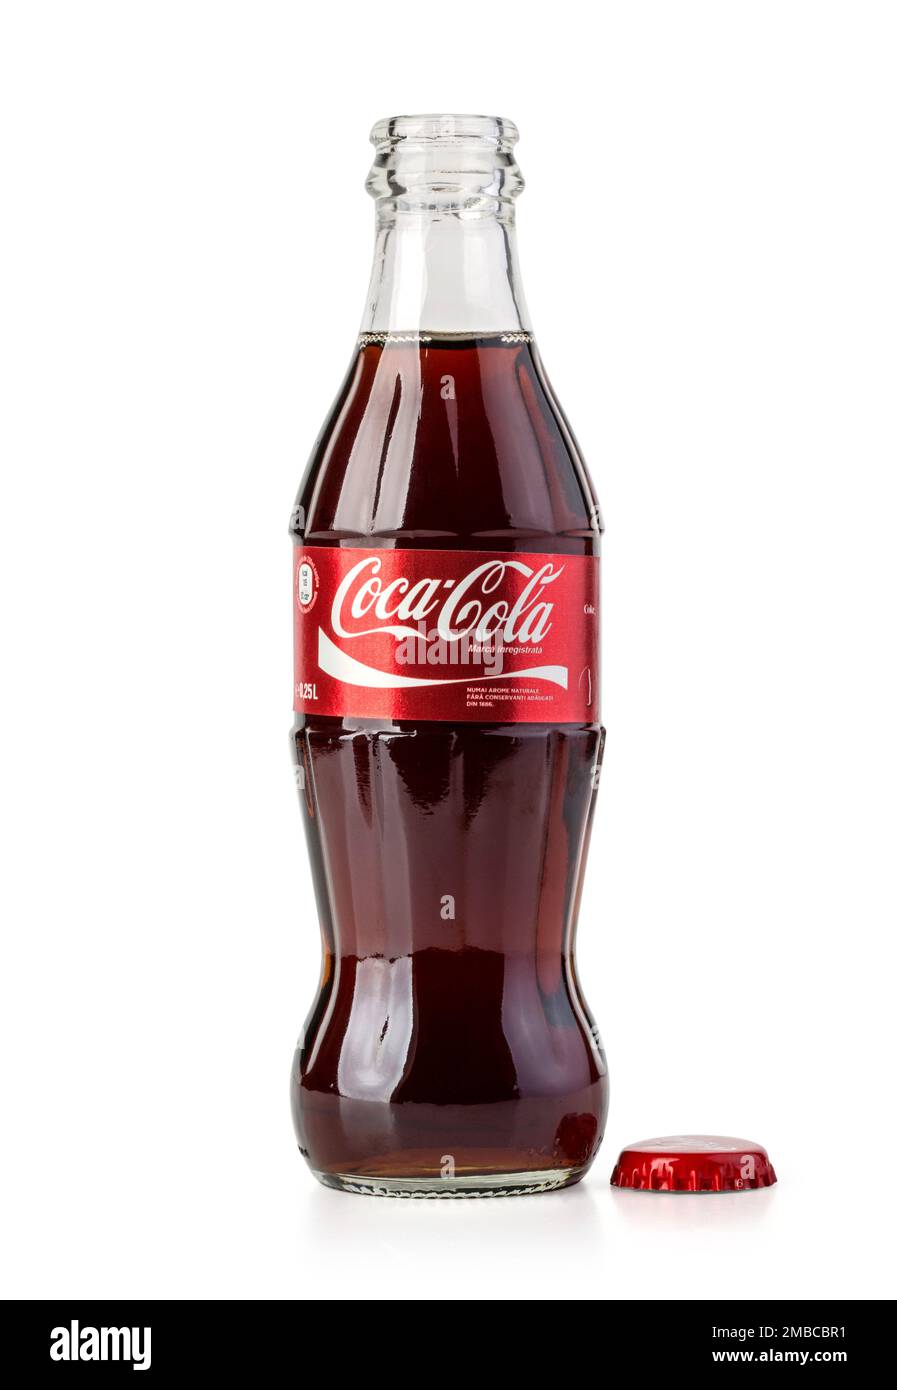 https://c8.alamy.com/comp/2MBCBR1/chisinau-moldova-may15-2016-classic-bottle-of-coca-cola-with-cup-isolated-on-white-with-clipping-path-2MBCBR1.jpg